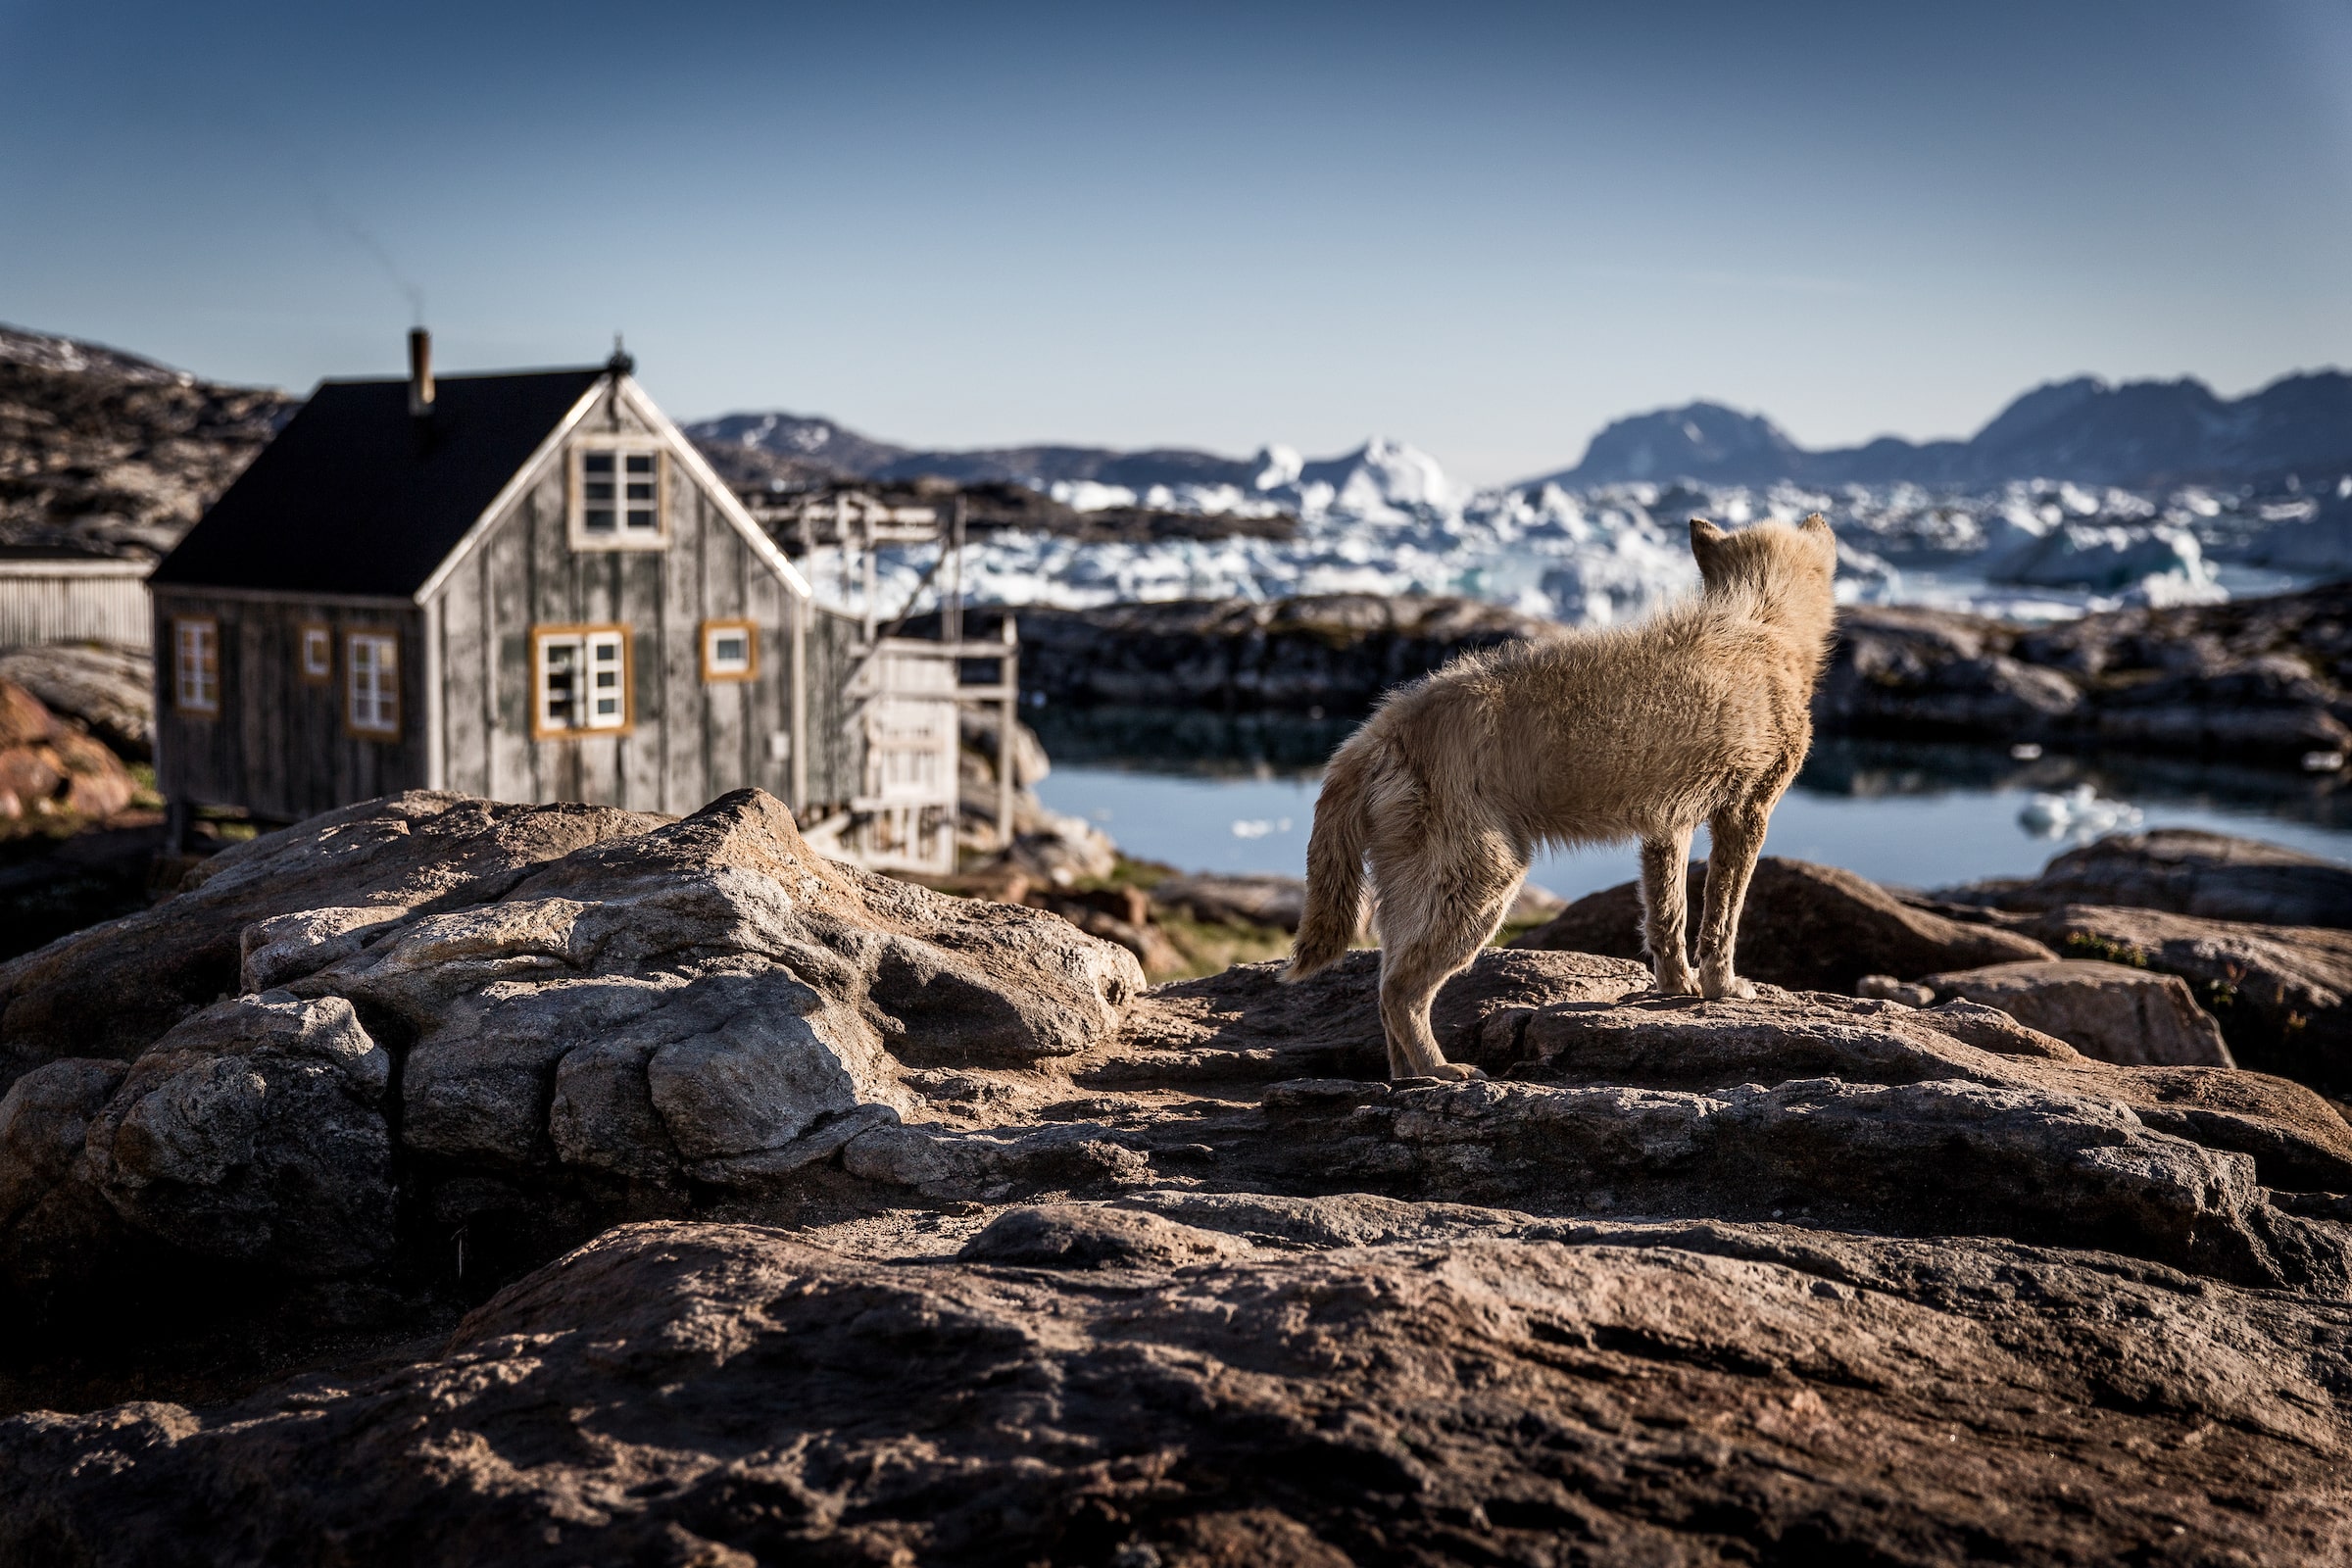 A sled dog in Tiniteqilaaq waiting for winter in East Greenland